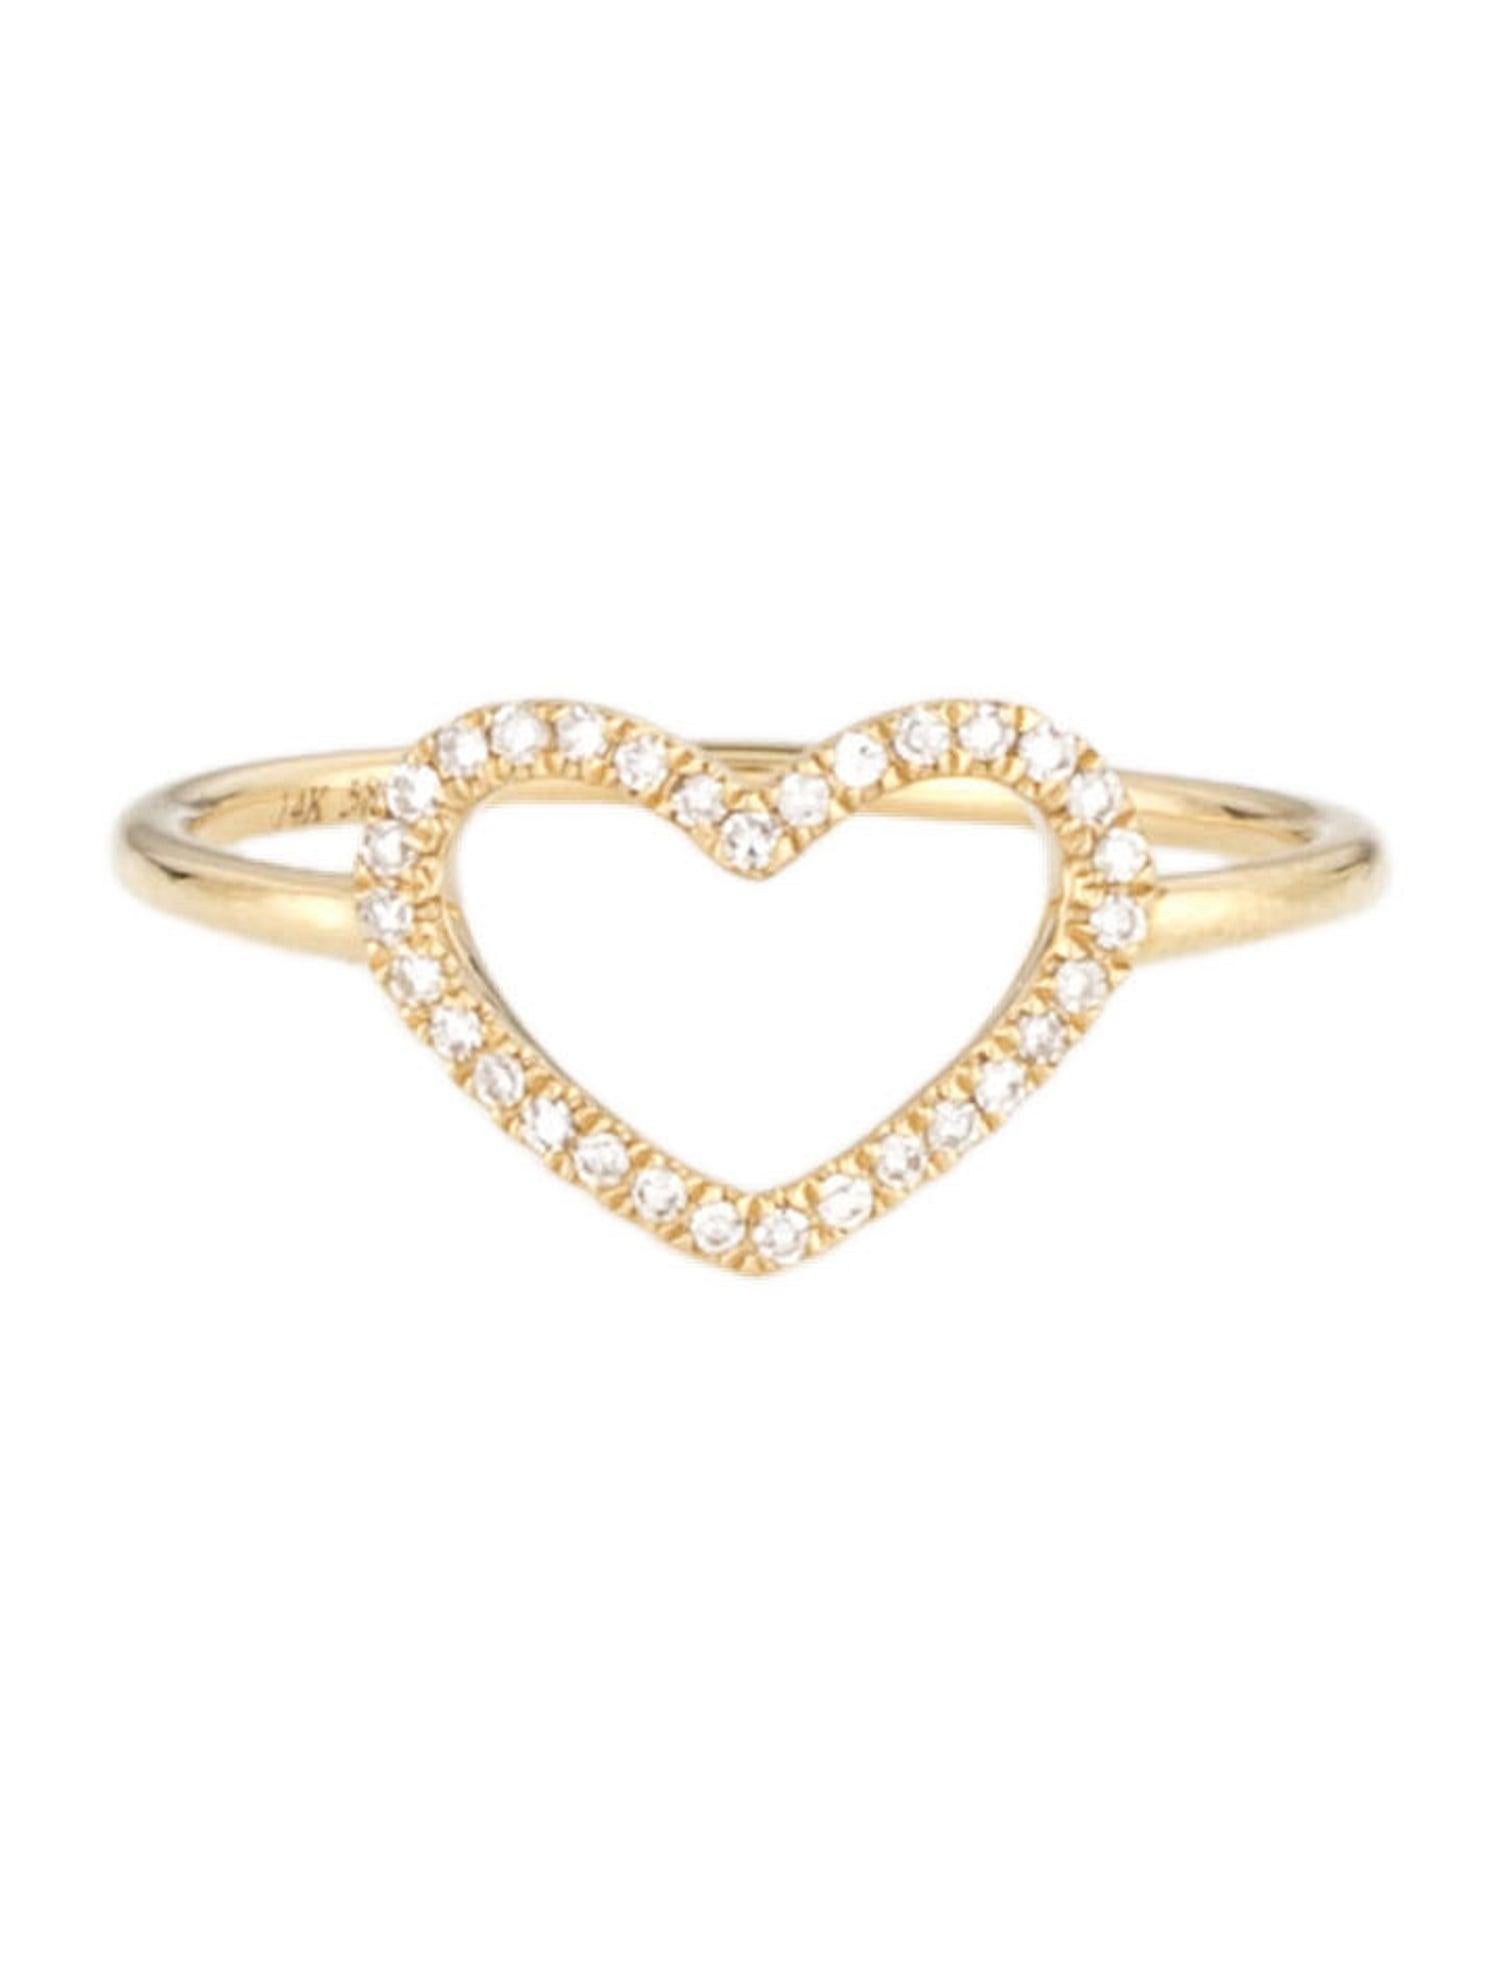 Fashion Ring Set: Made from real 14k gold and round diamonds approximately 0.08 ct. Certified diamonds, available in white, rose, yellow gold  with a color and clarity of GH-SI 
 Surprise Your Loved Ones with Our Open Heart Shaped Diamond Ring For